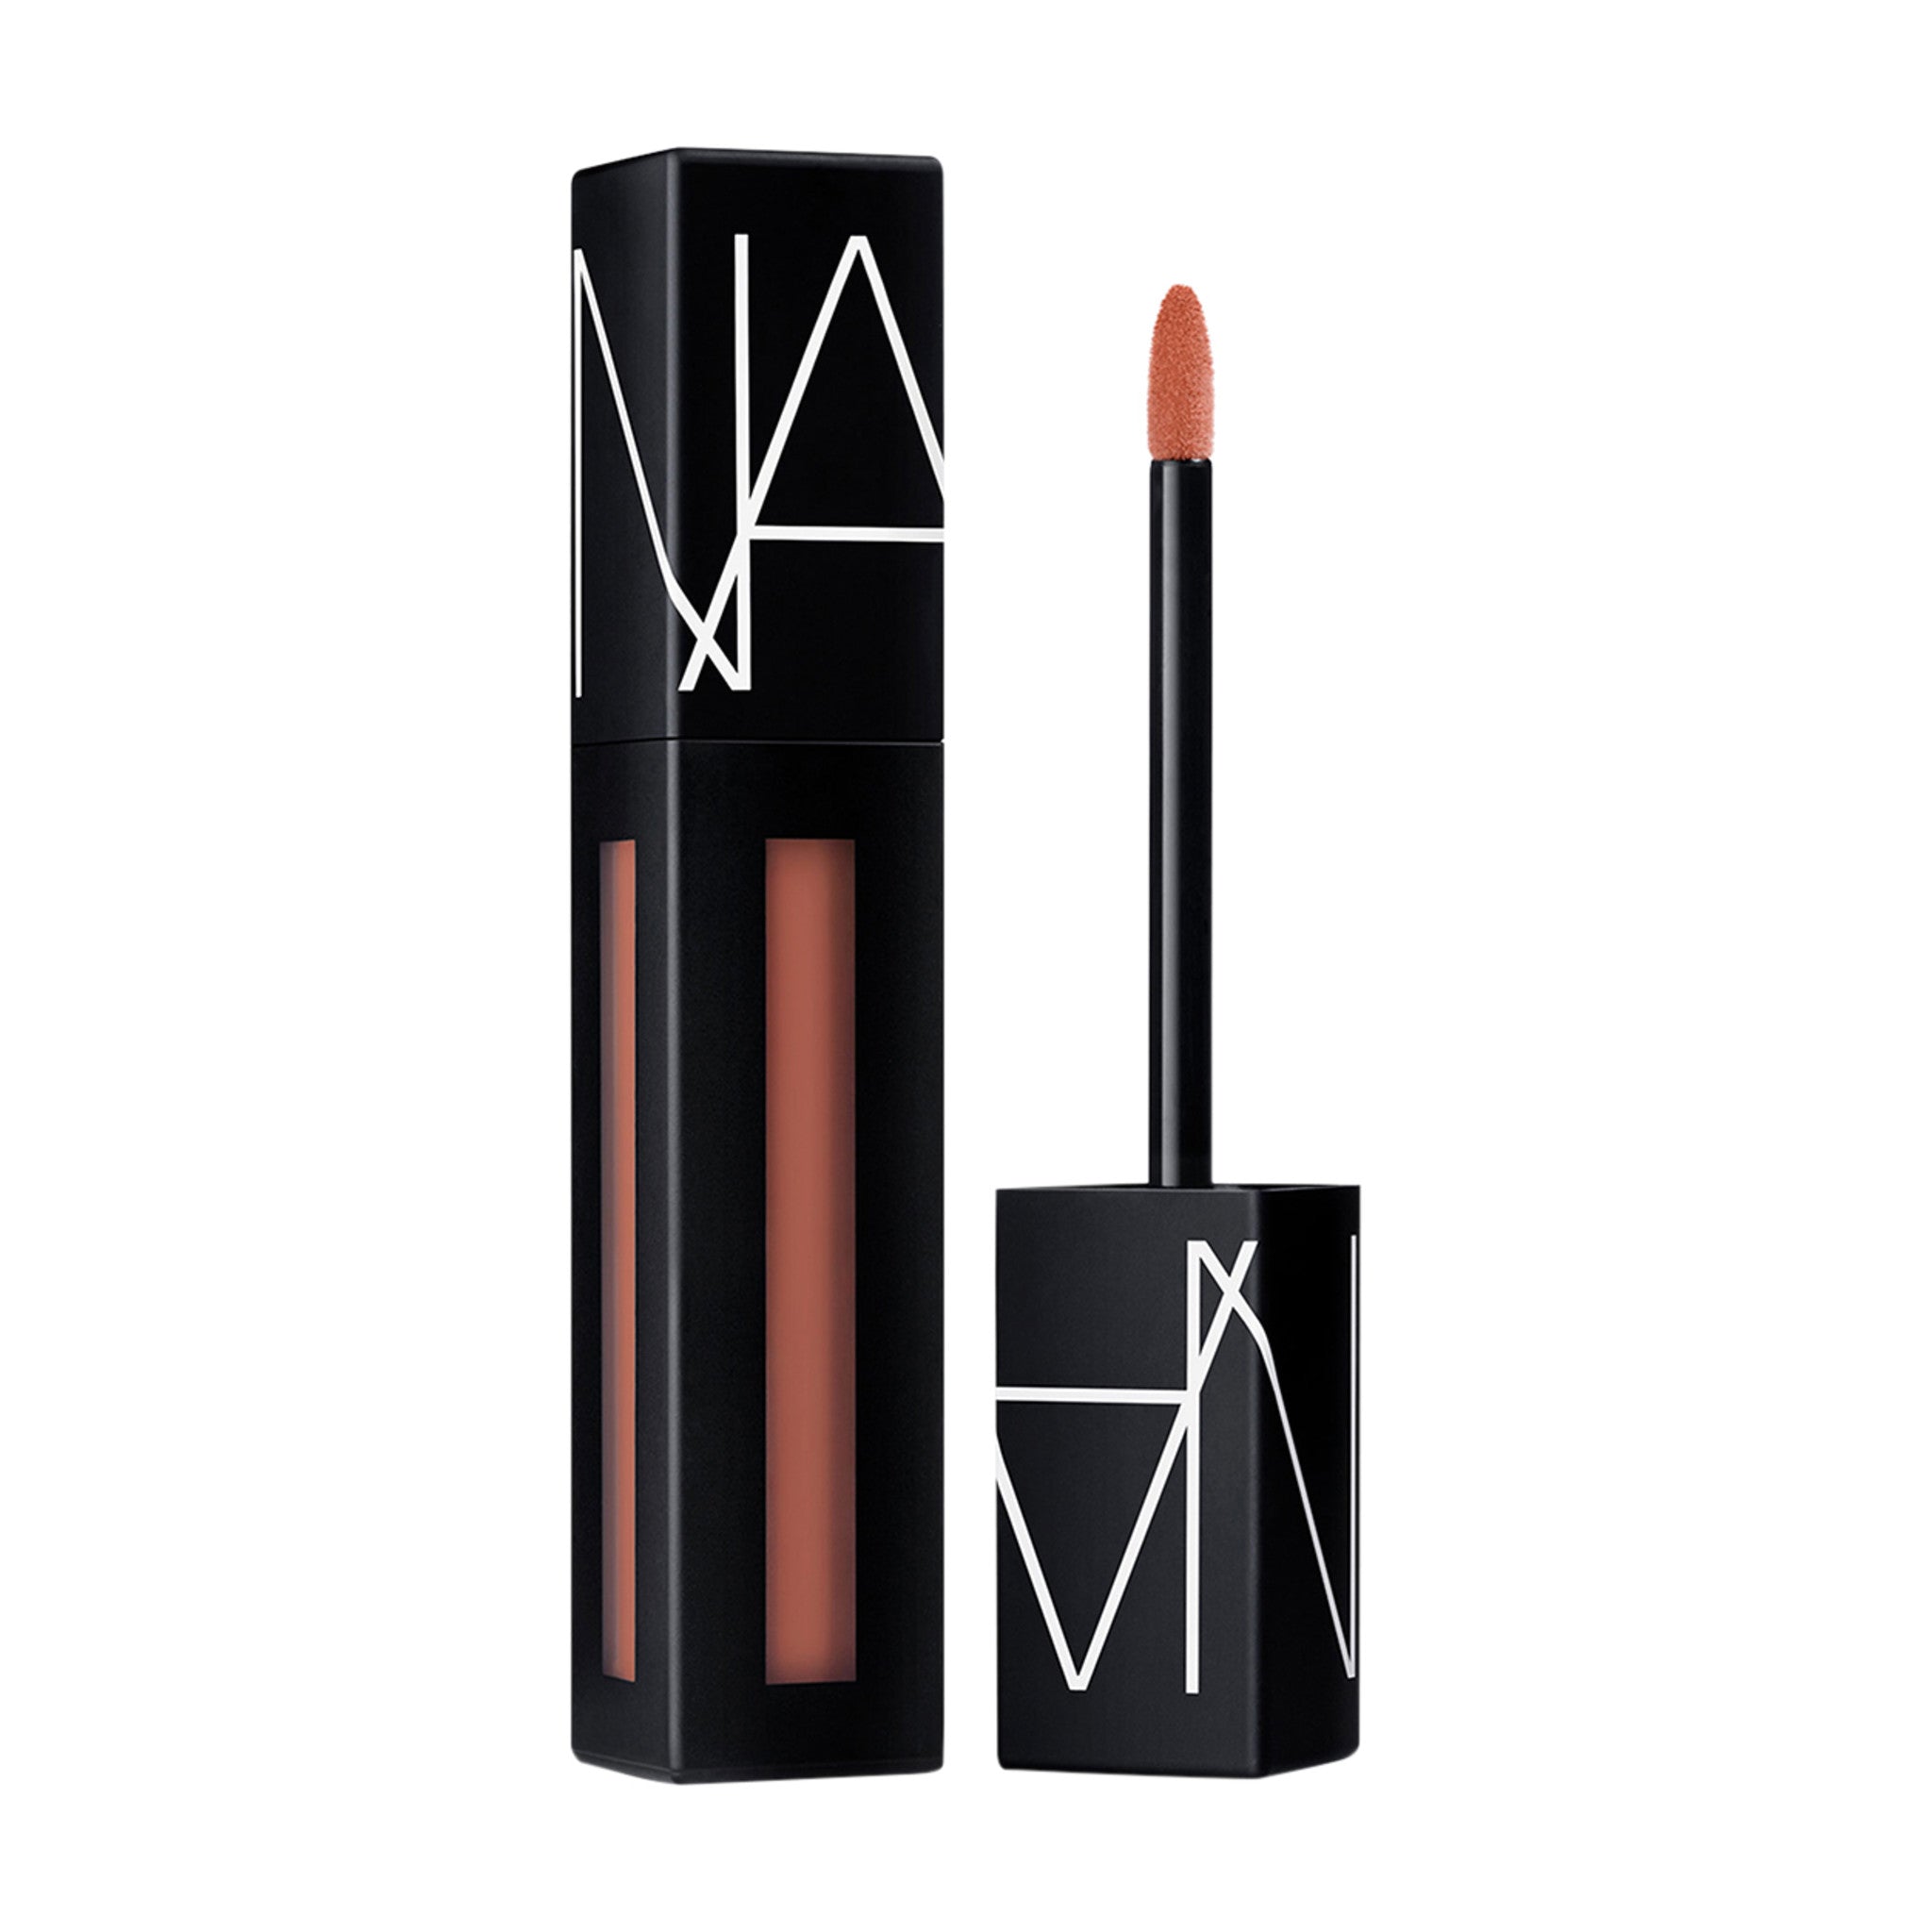 Nars Powermatte Lip Pigment Color/Shade variant: Get It On (Tan Rose) main image. This product is in the color coral